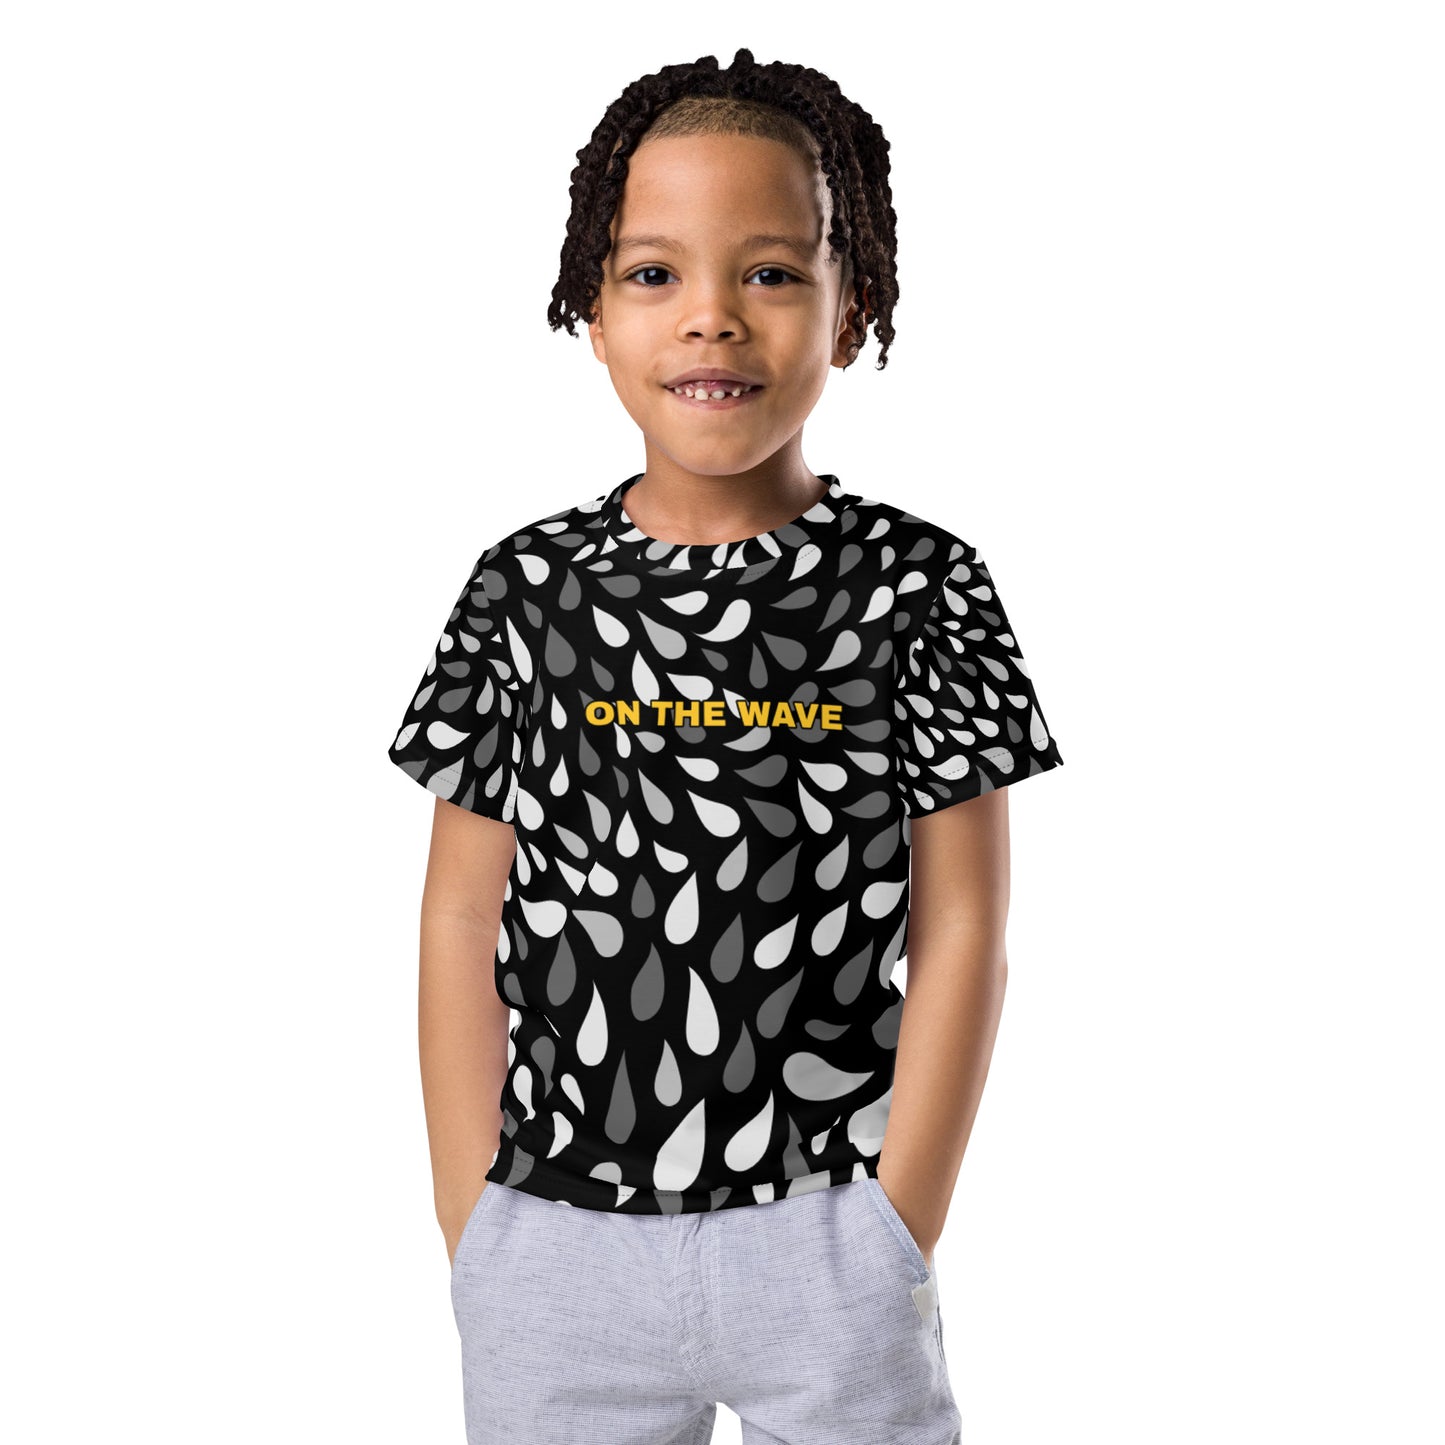 Kids on the wave crew neck t-shirt